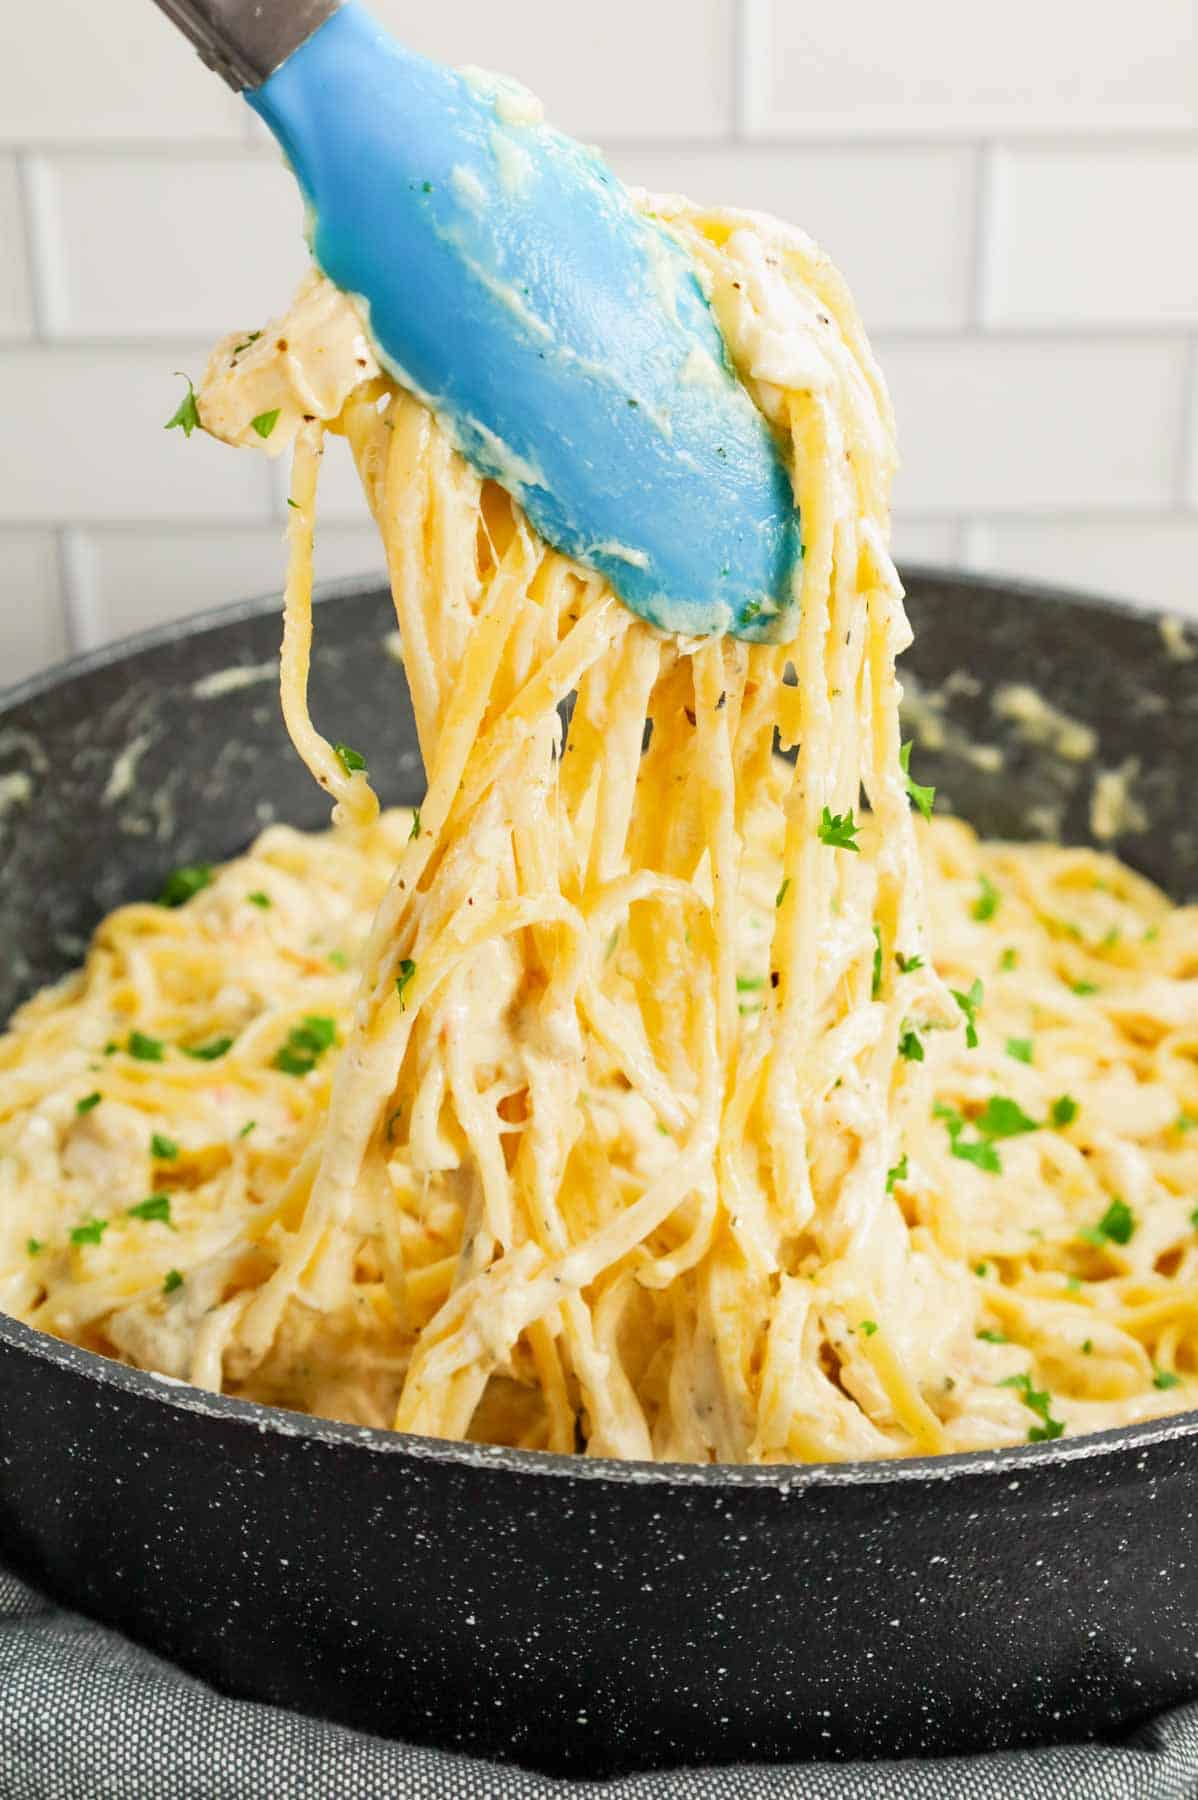 Chicken Alfredo Linguine is a delicious pasta recipe with a creamy garlic parmesan sauce and loaded with shredded rotisserie chicken.